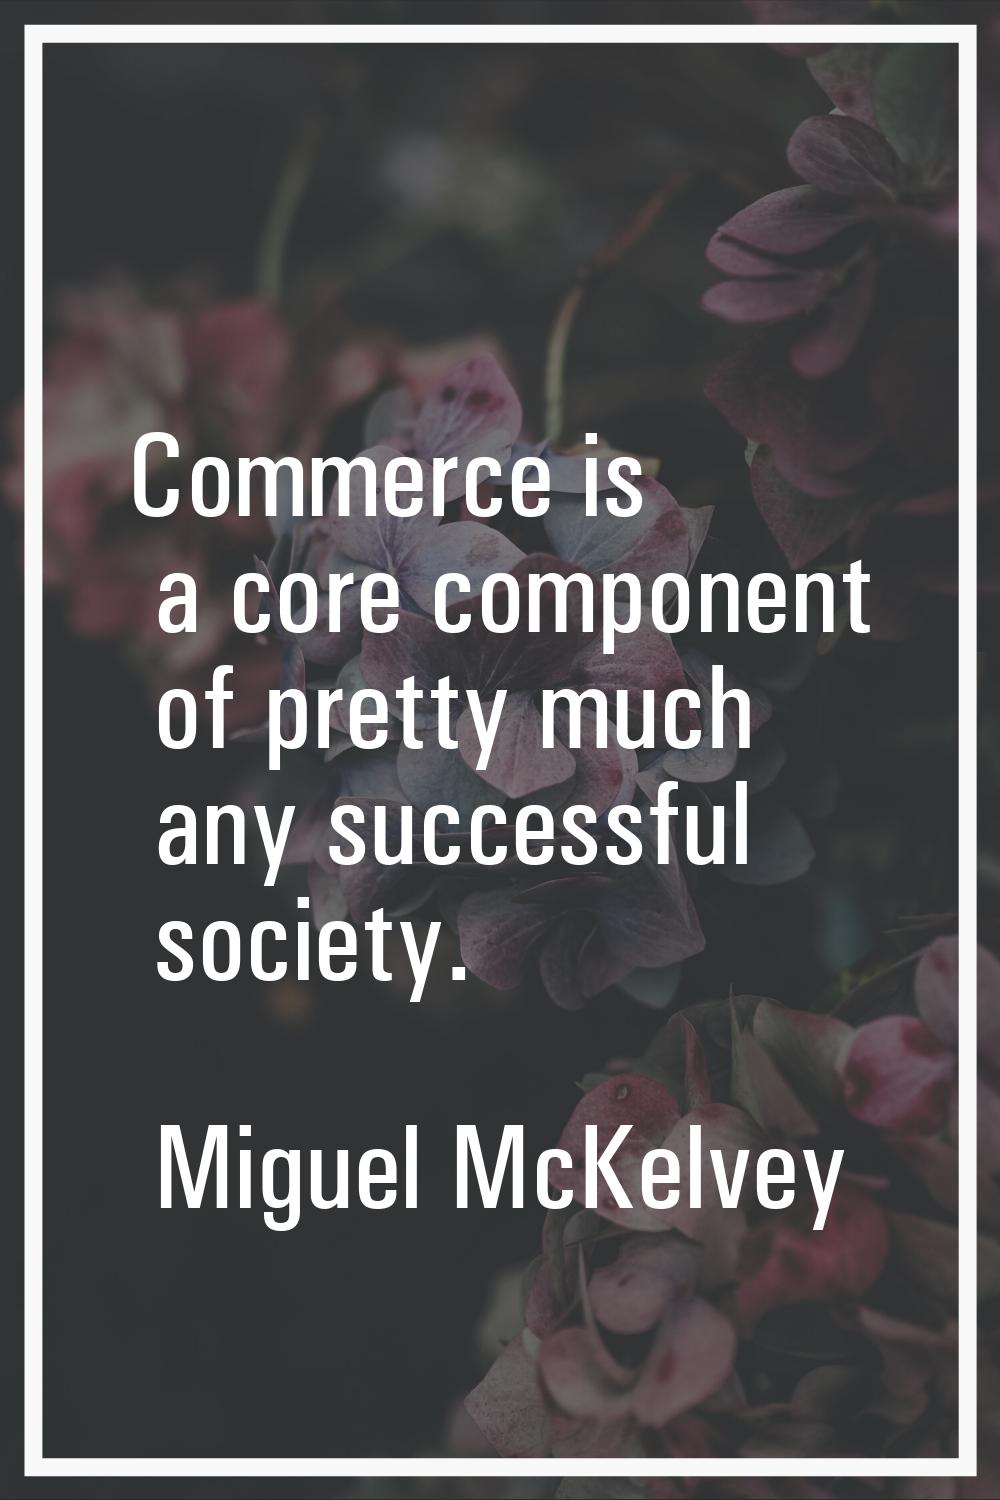 Commerce is a core component of pretty much any successful society.